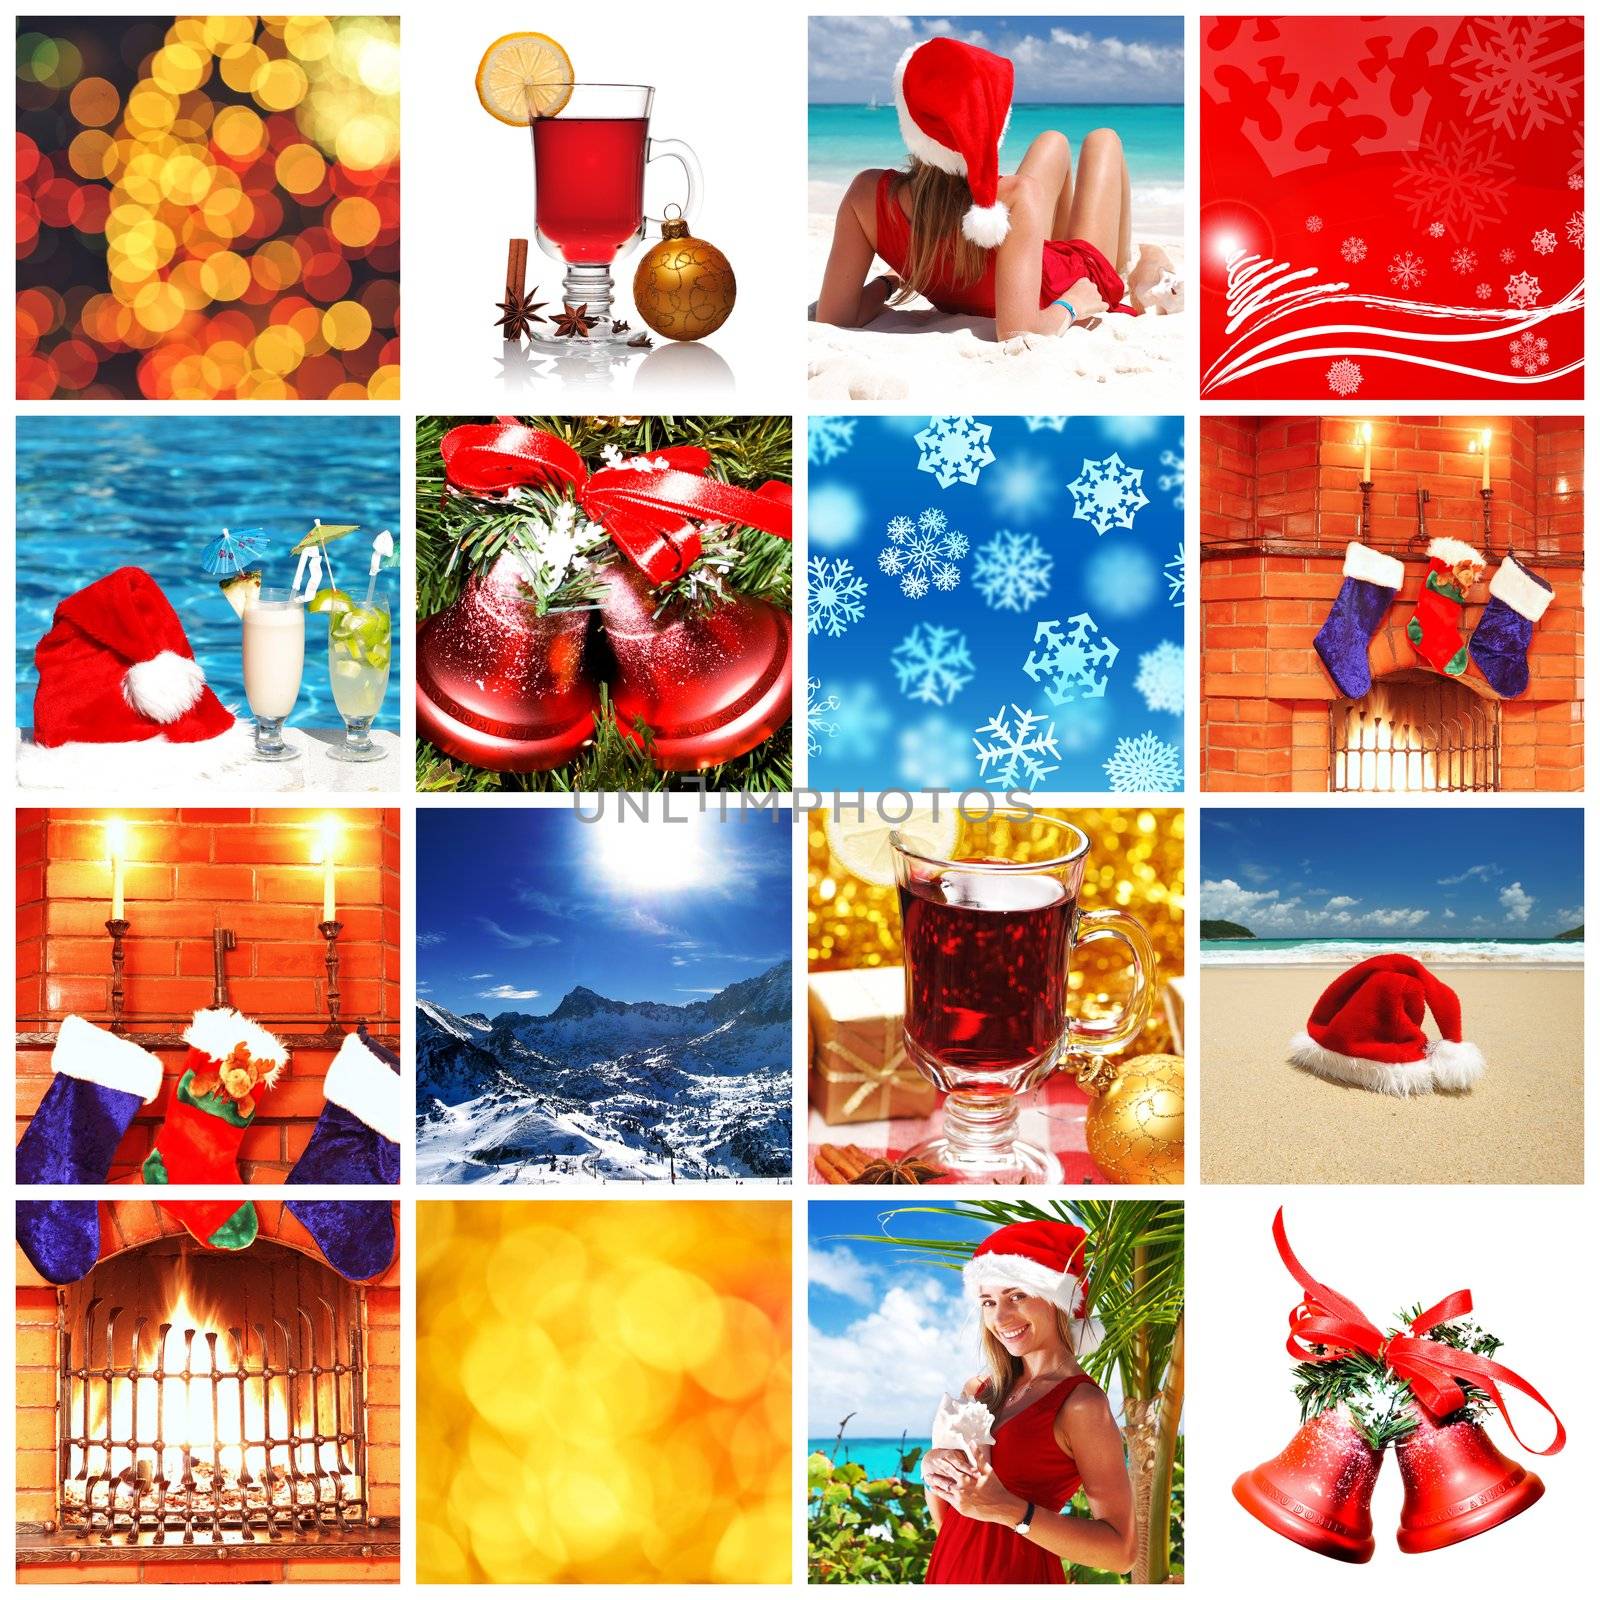 Christmas collage  by haveseen